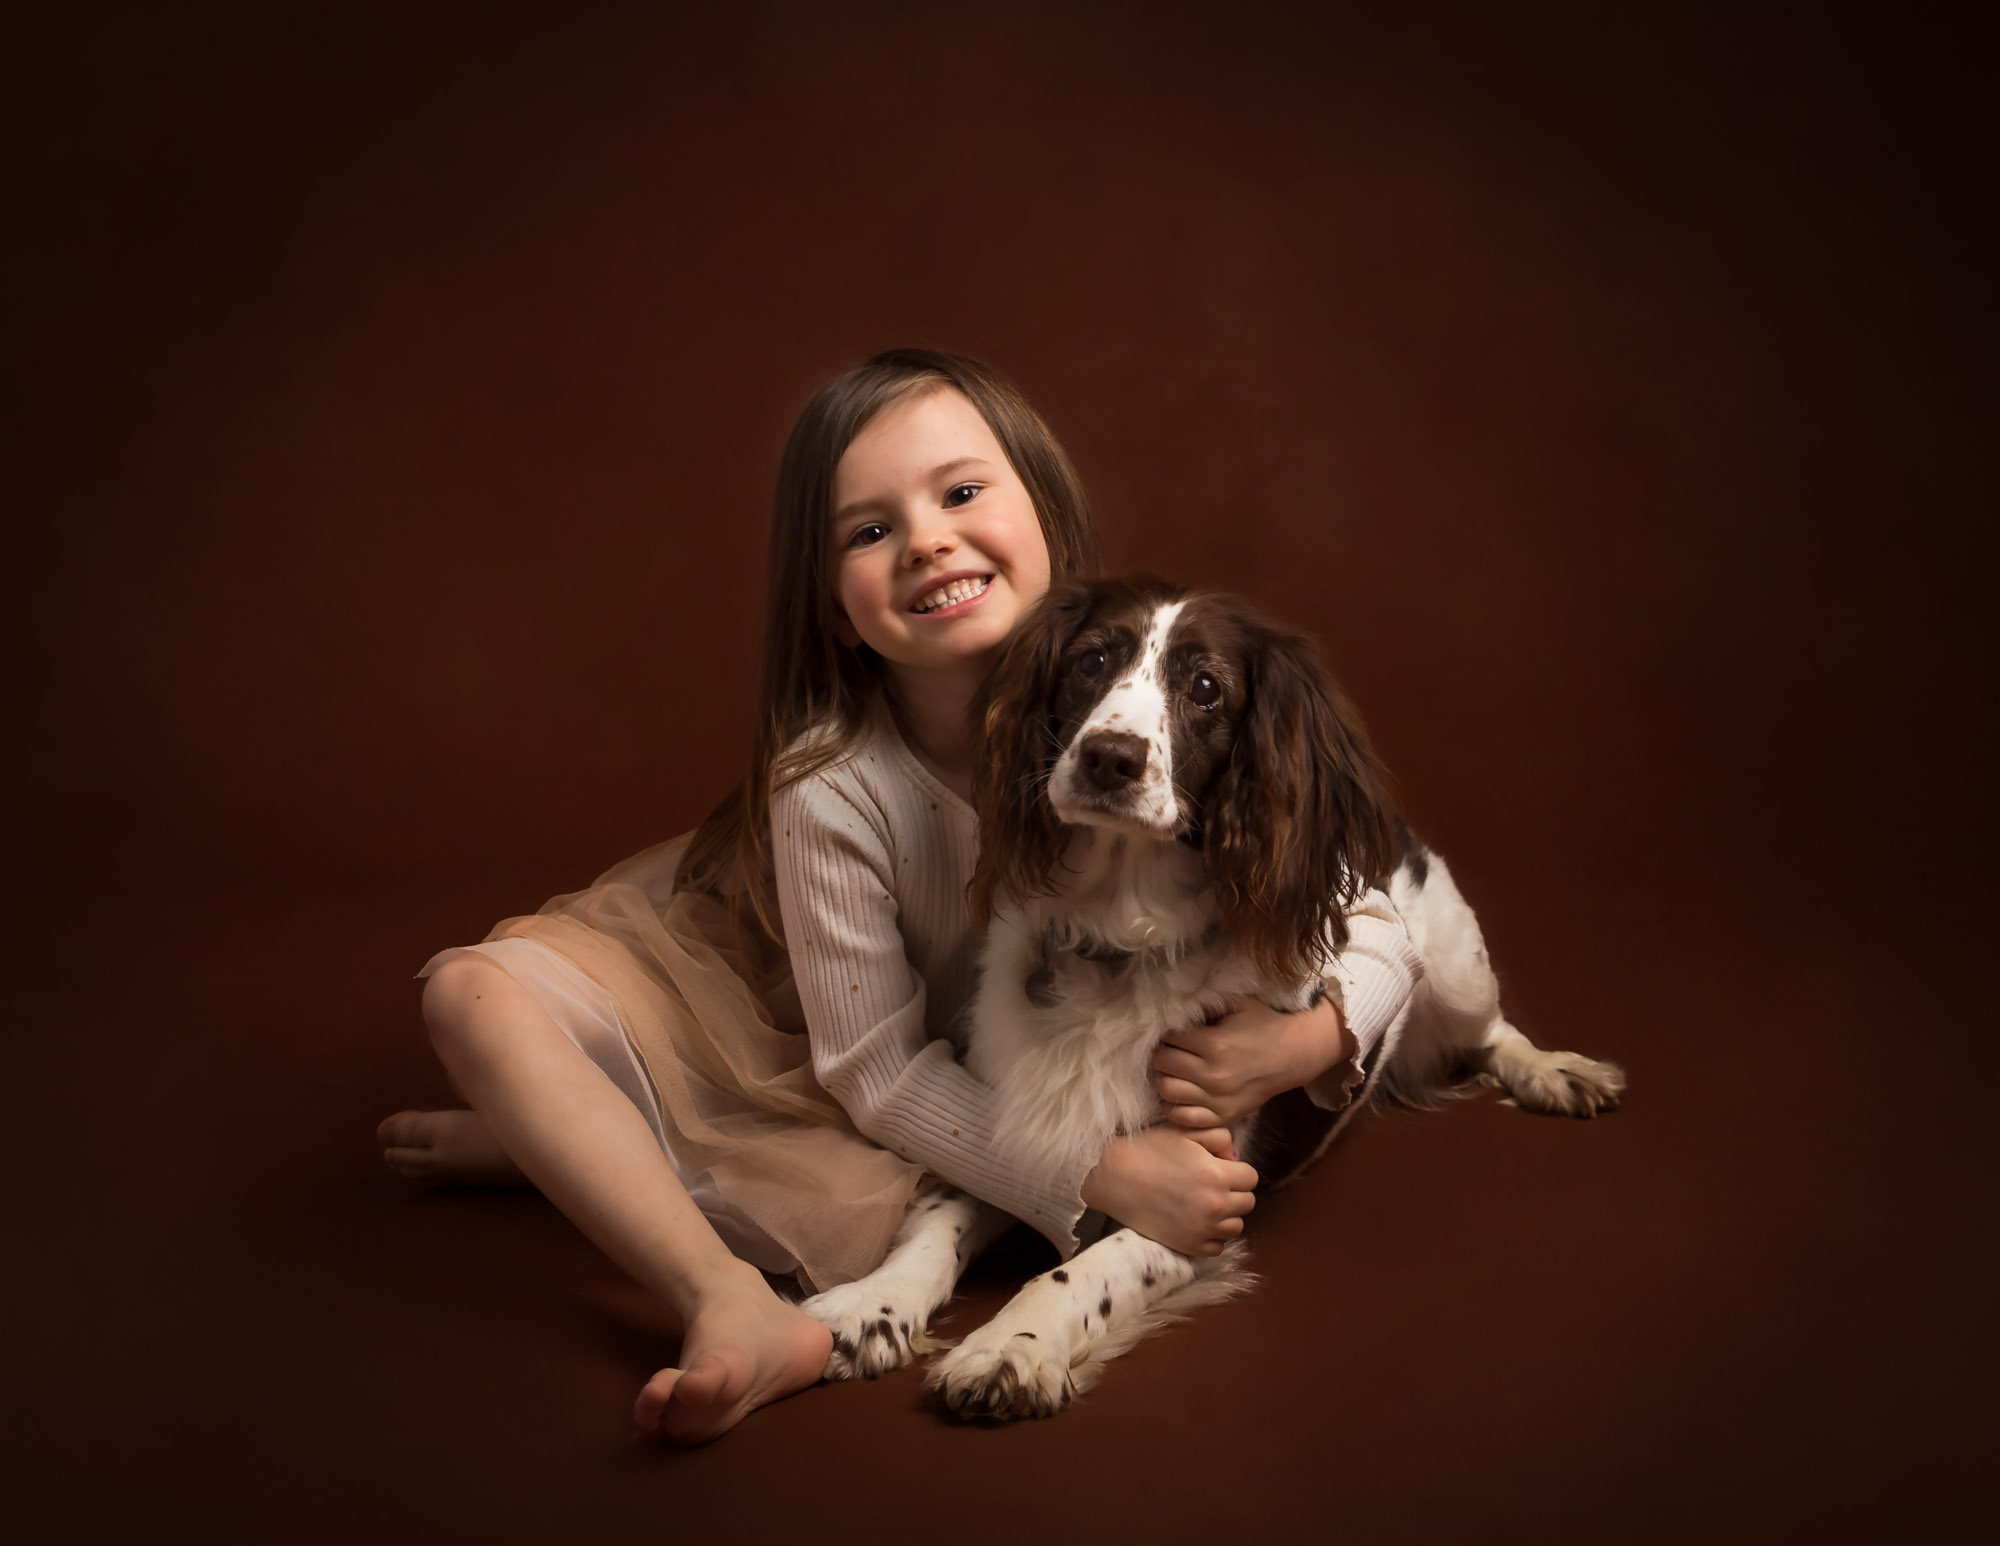 Girl smiling sat with pet dog